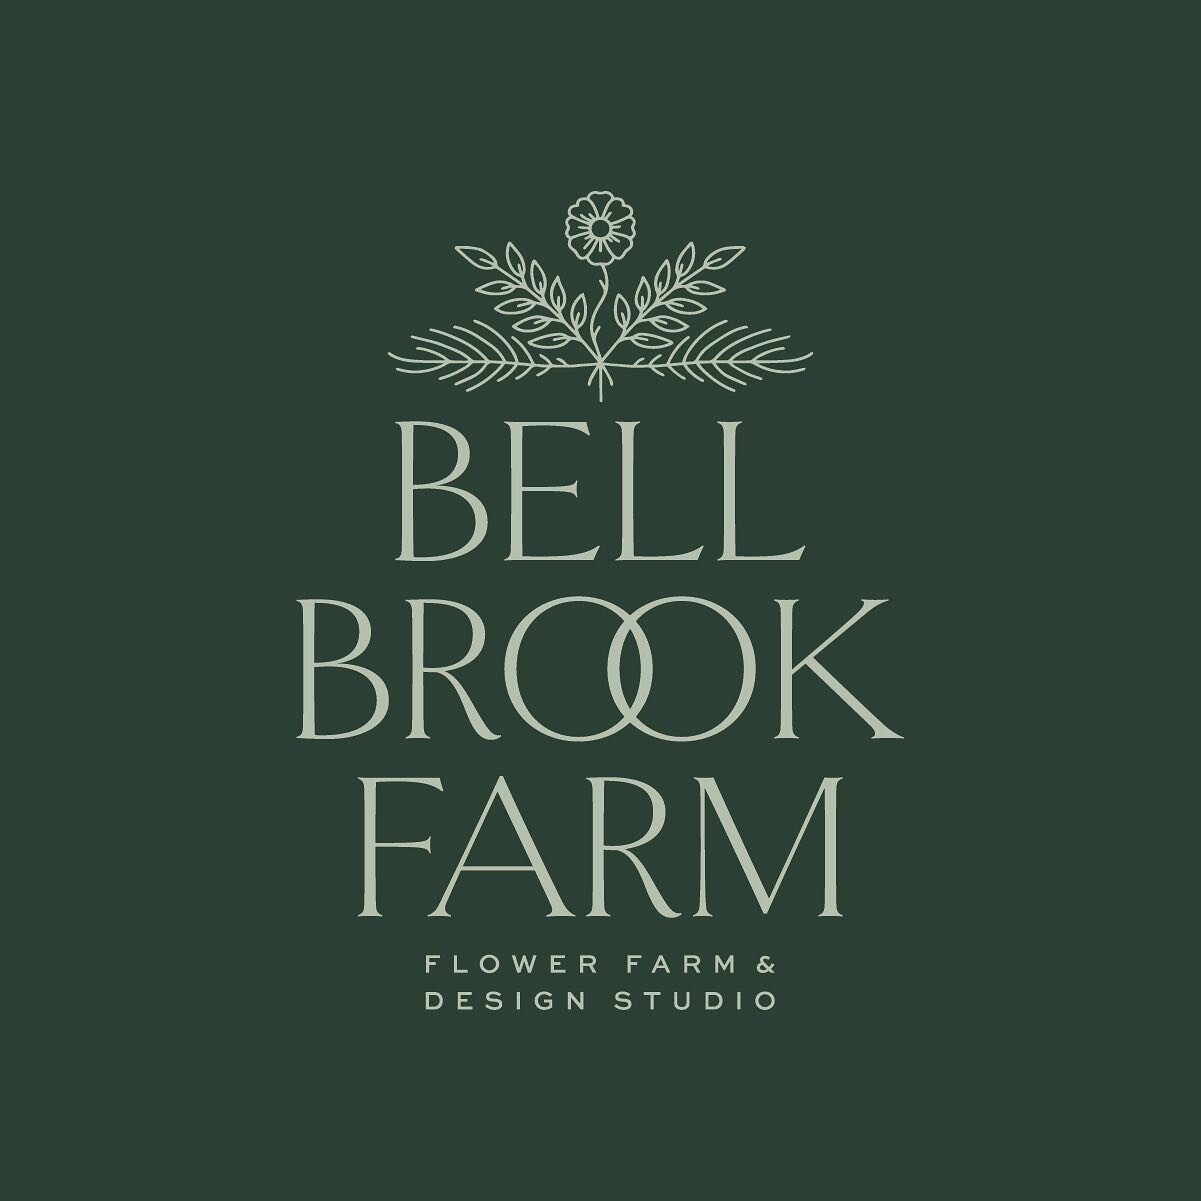 New logo system for @bellbrookfarm 🌸 I had so much fun working on a rebrand with Emily this spring, just as she made the big leap to focusing on her flower farm and design studio full time. We wanted to show how her business has grown with this new 